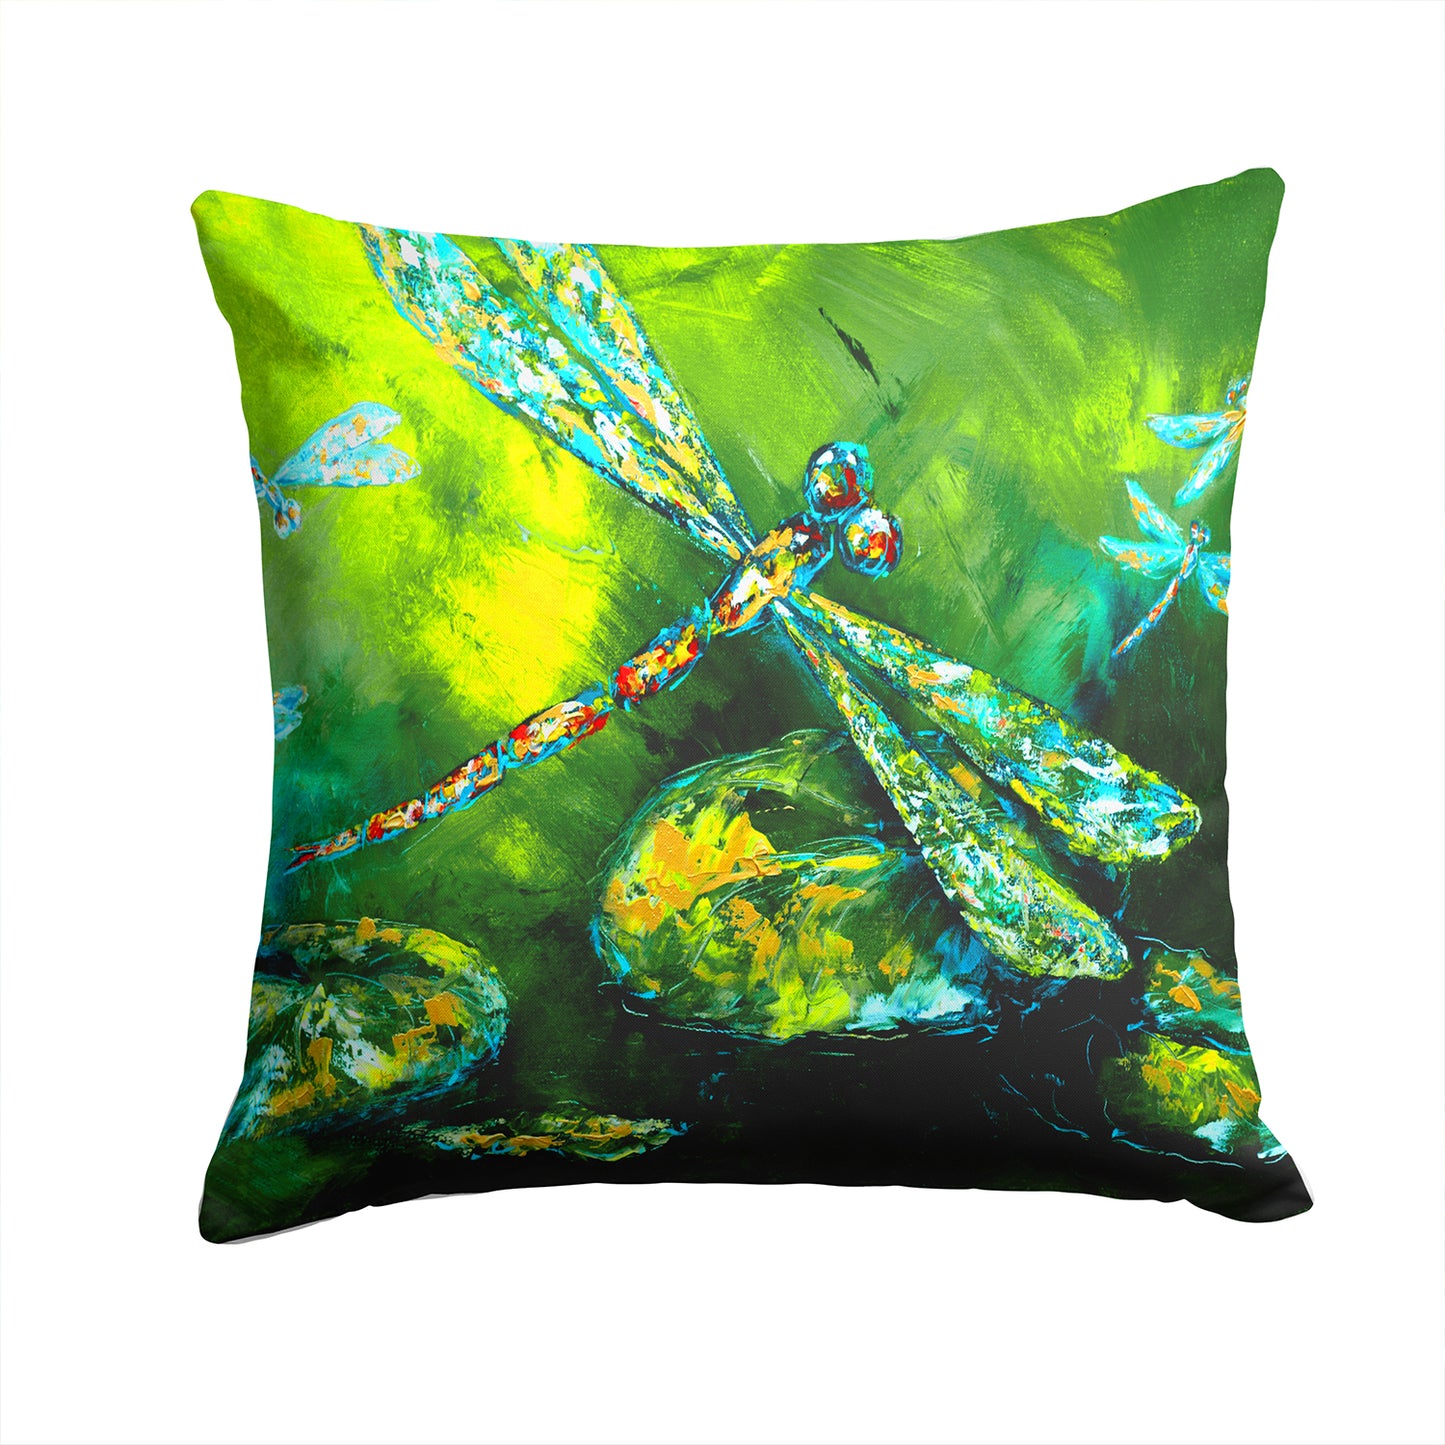 Buy this Insect - Dragonfly Summer Flies Fabric Decorative Pillow